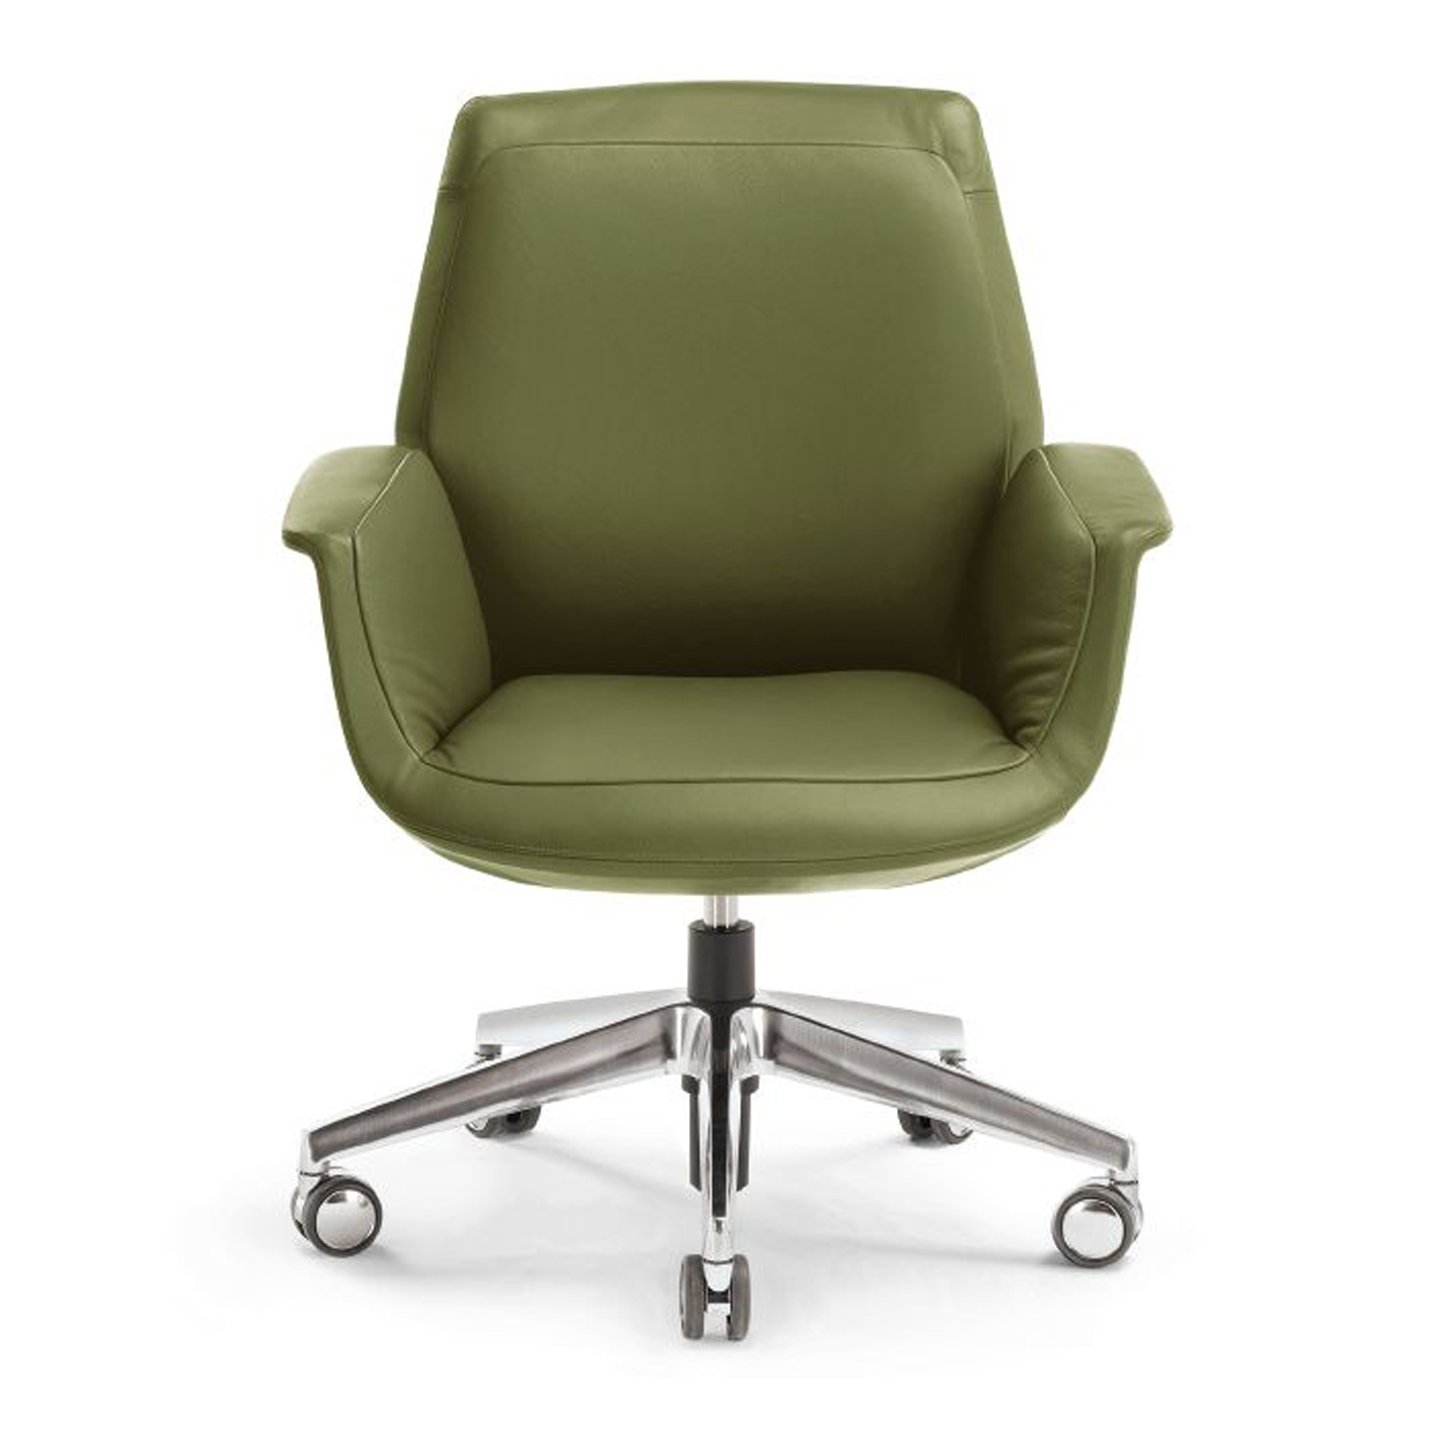 Haworth Downtown chair in green leather with swivel base